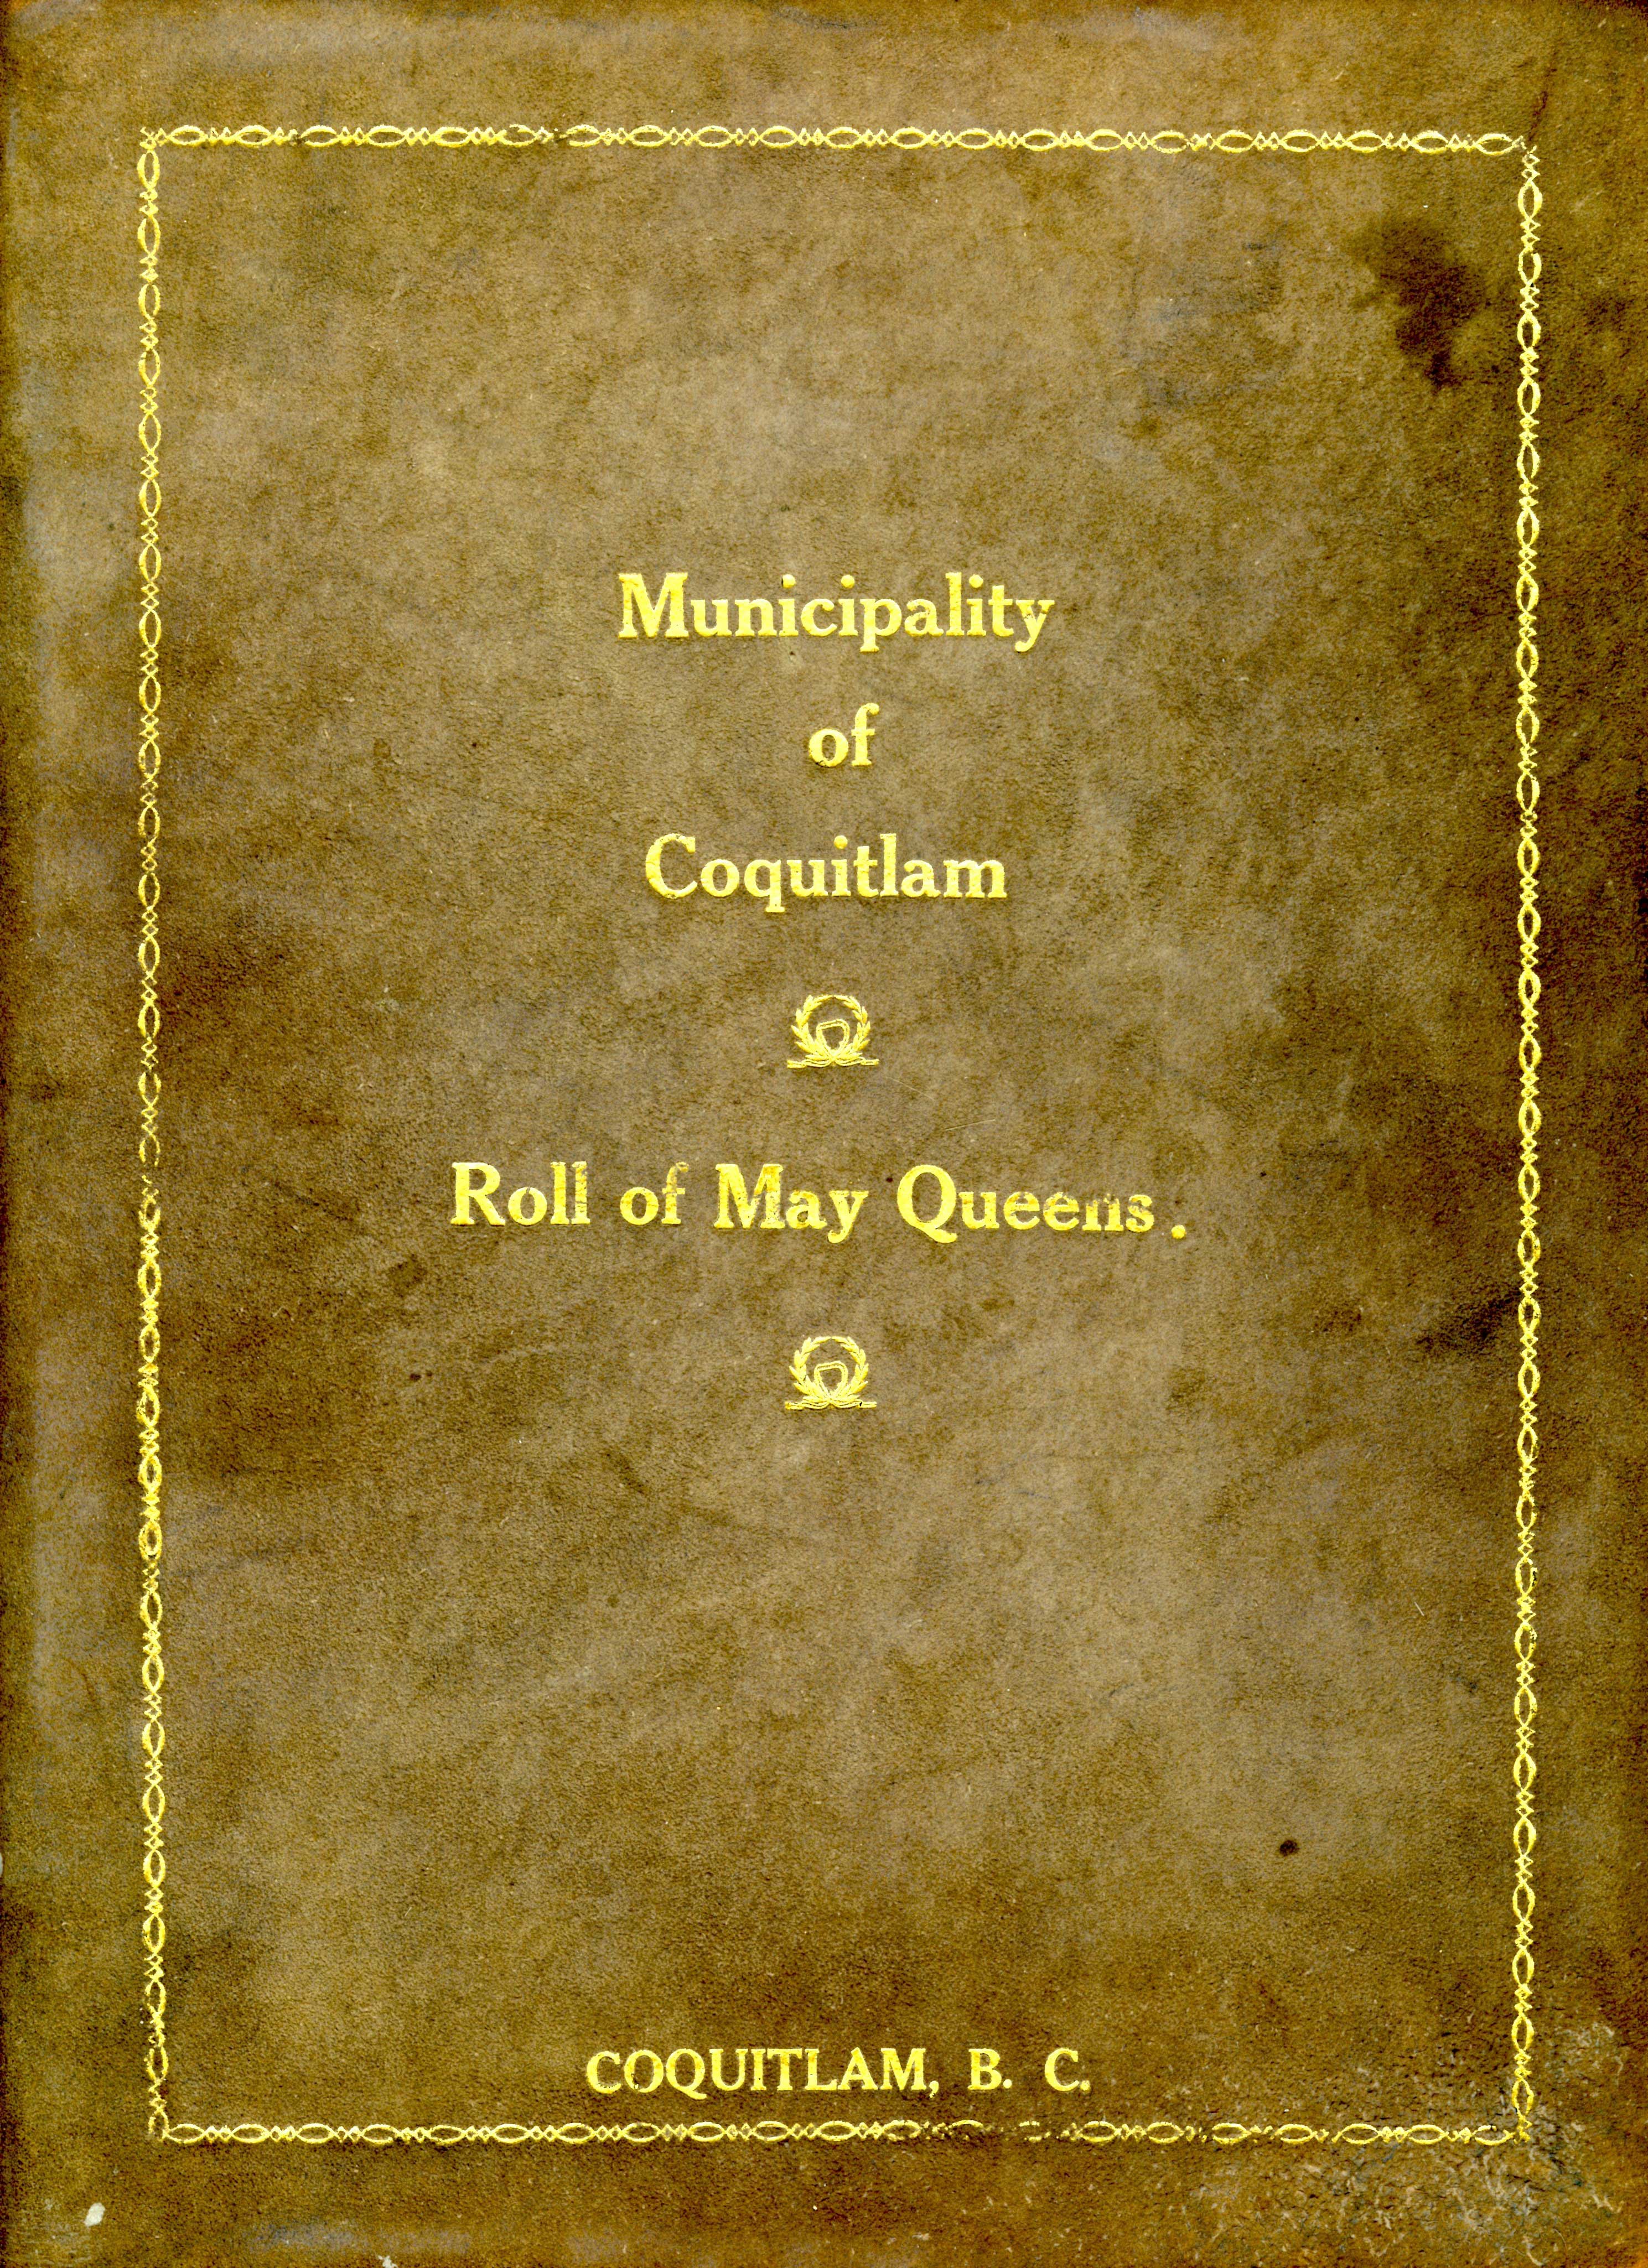 Cover - Roll of May Queens, 1940 to 1971 (JPG) Opens in new window